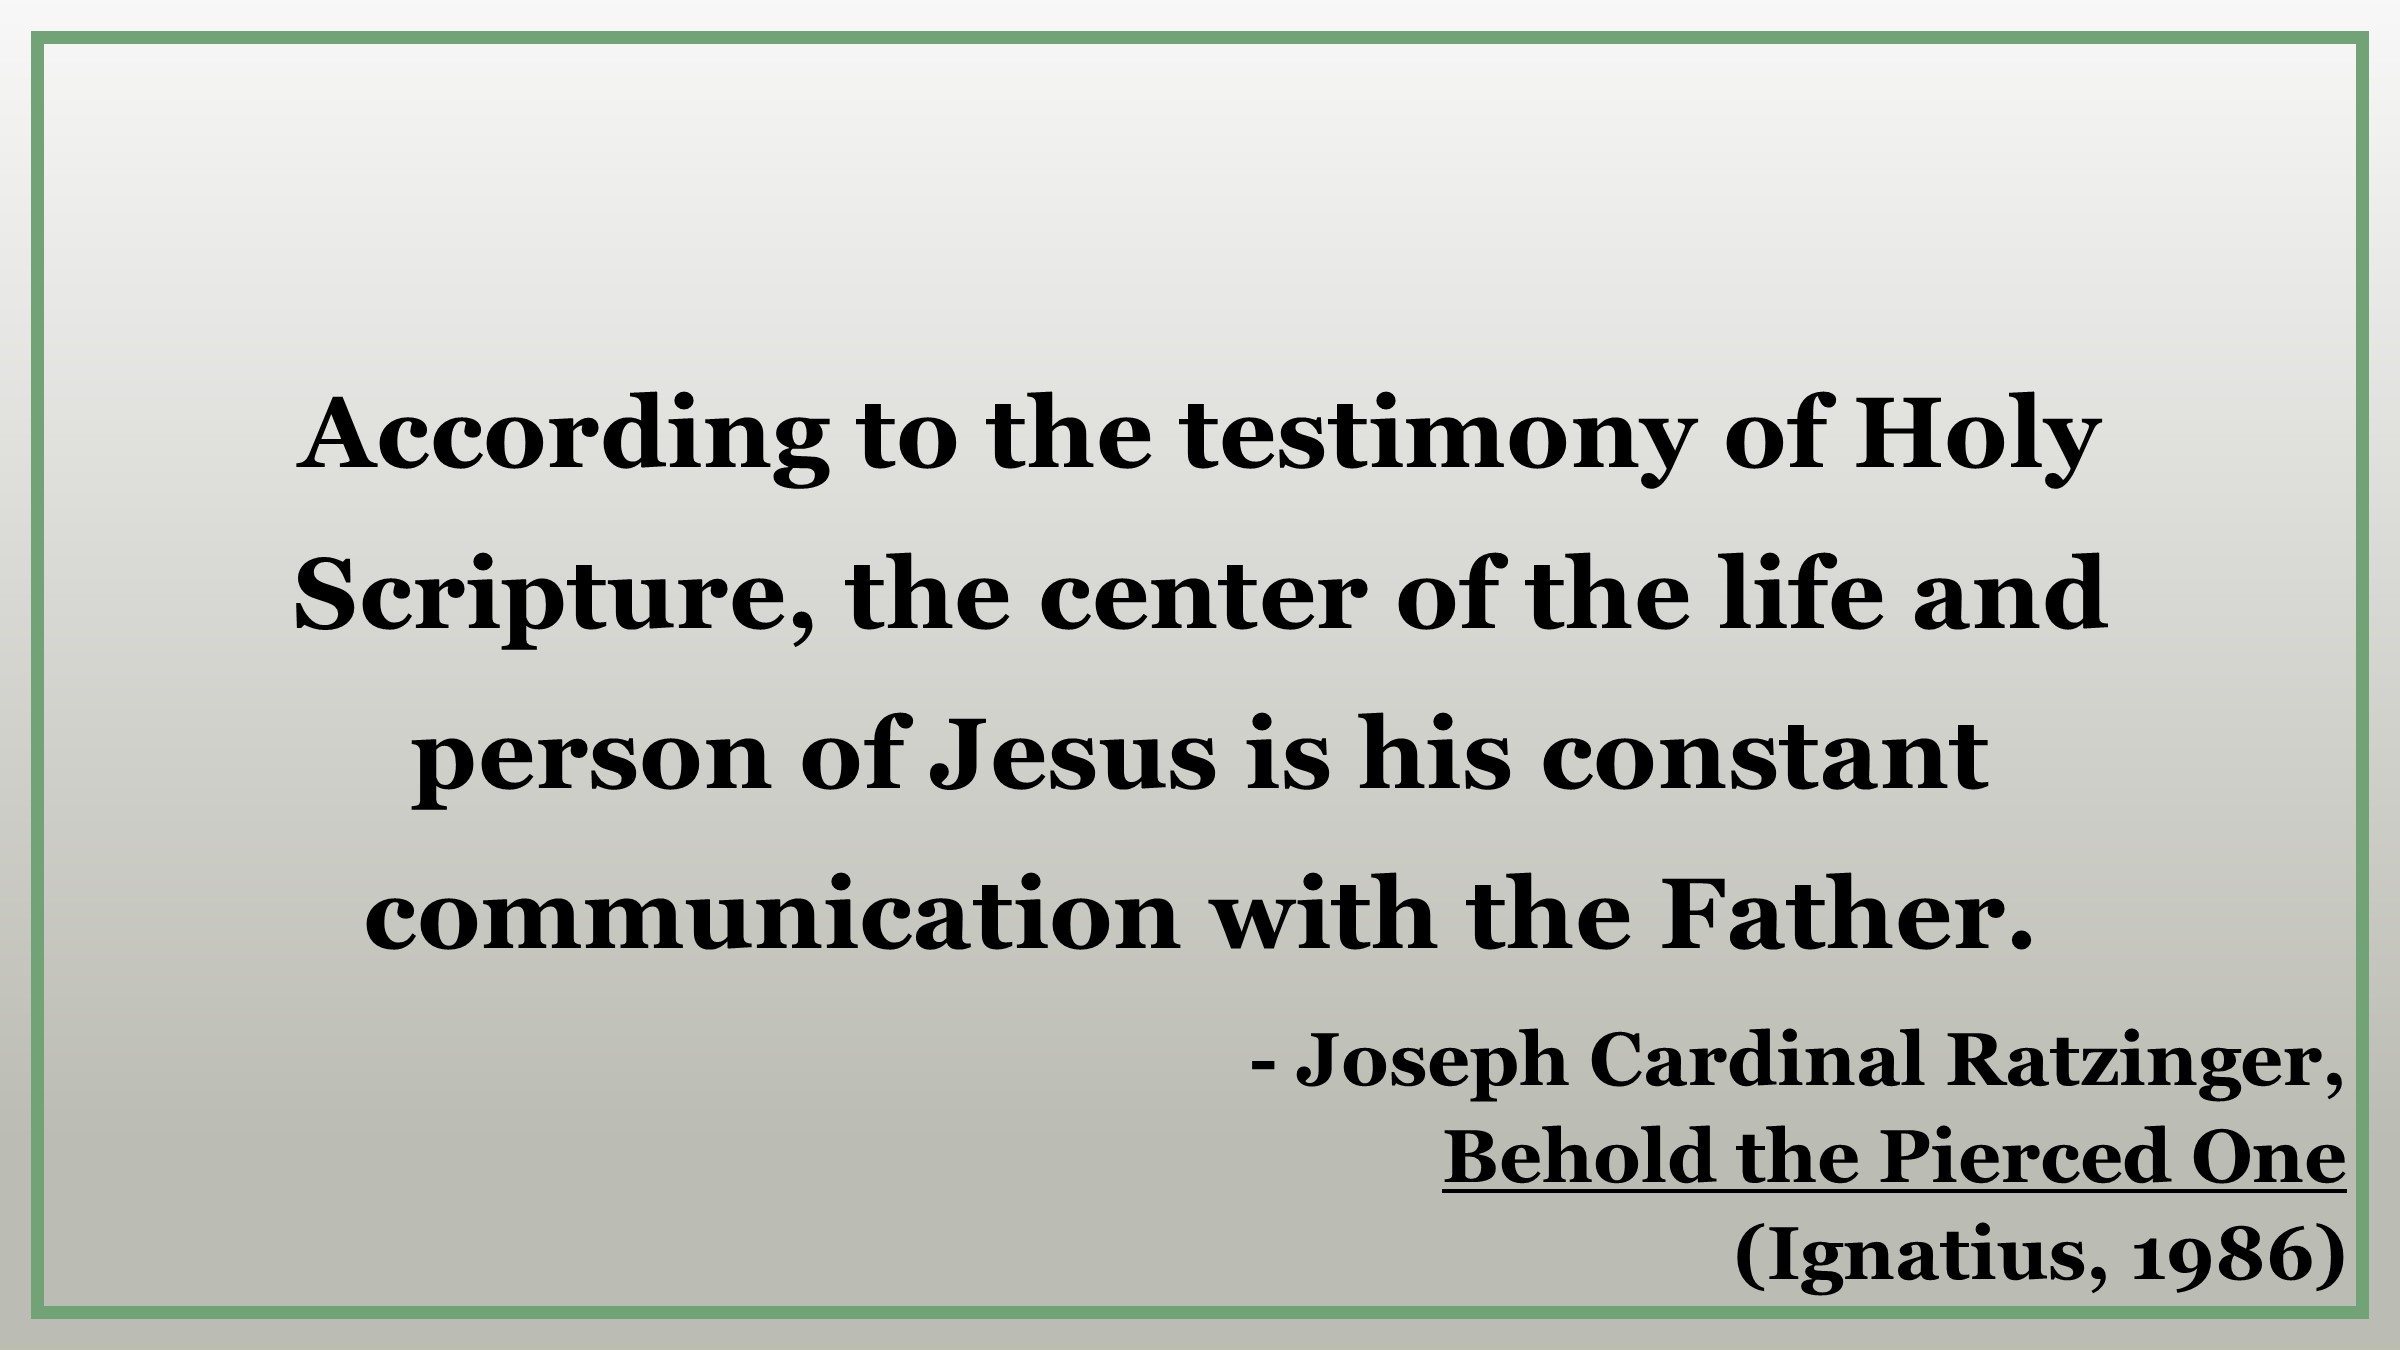 "According to the testimony of Holy Scripture, the center of the life and person of Jesus is his constant communication with the Father." - Joseph Cardinal Ratzinger, Behold the Pierced One from Ignatius Press